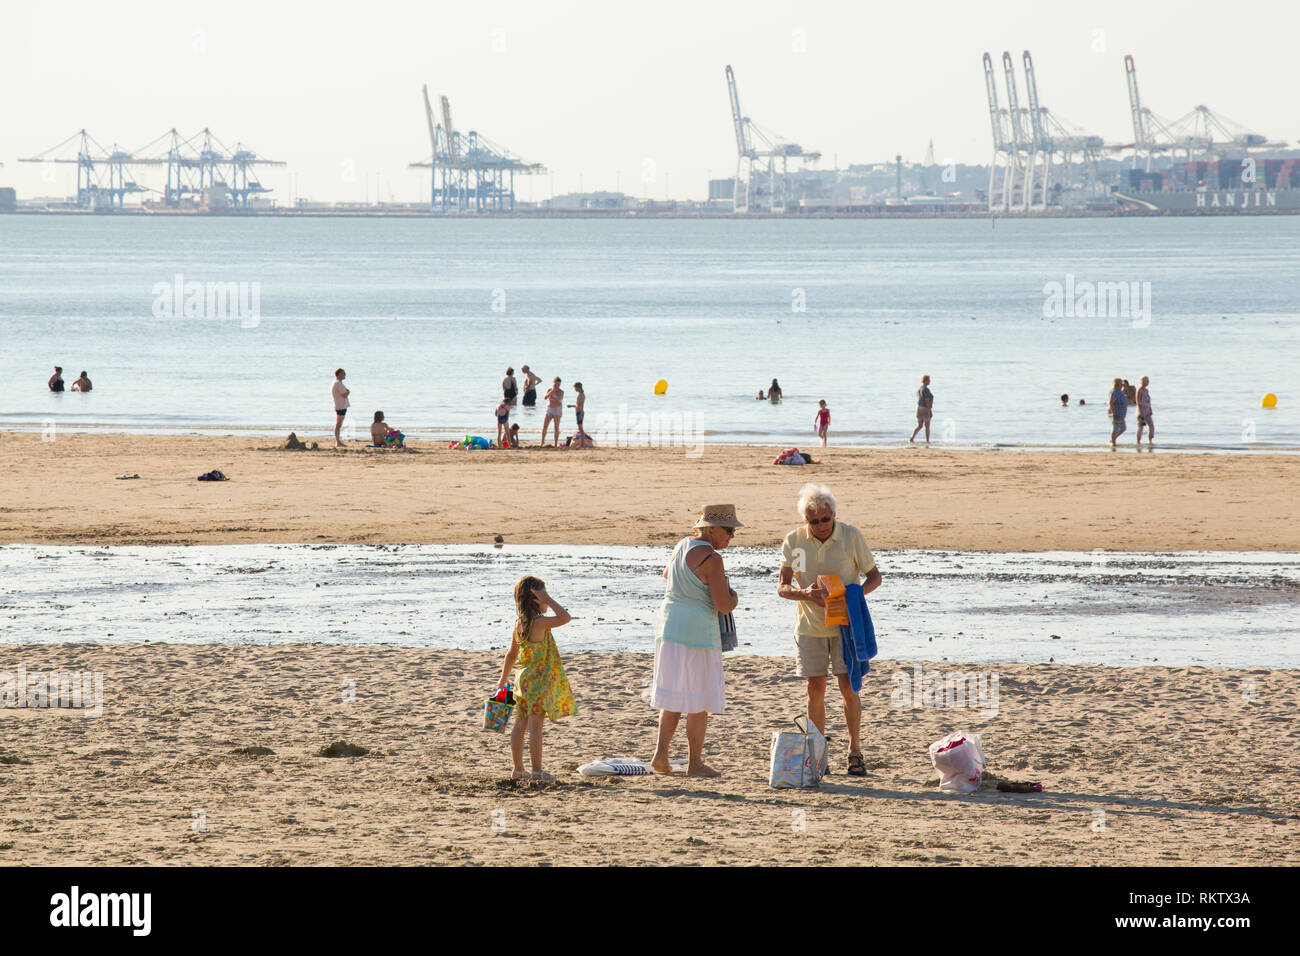 Holidaymakers enjoy the Summer sun on the beach at Plage de Butin, Honfleur, France with the gantry cranes of container port of Le Havre across the Se Stock Photo